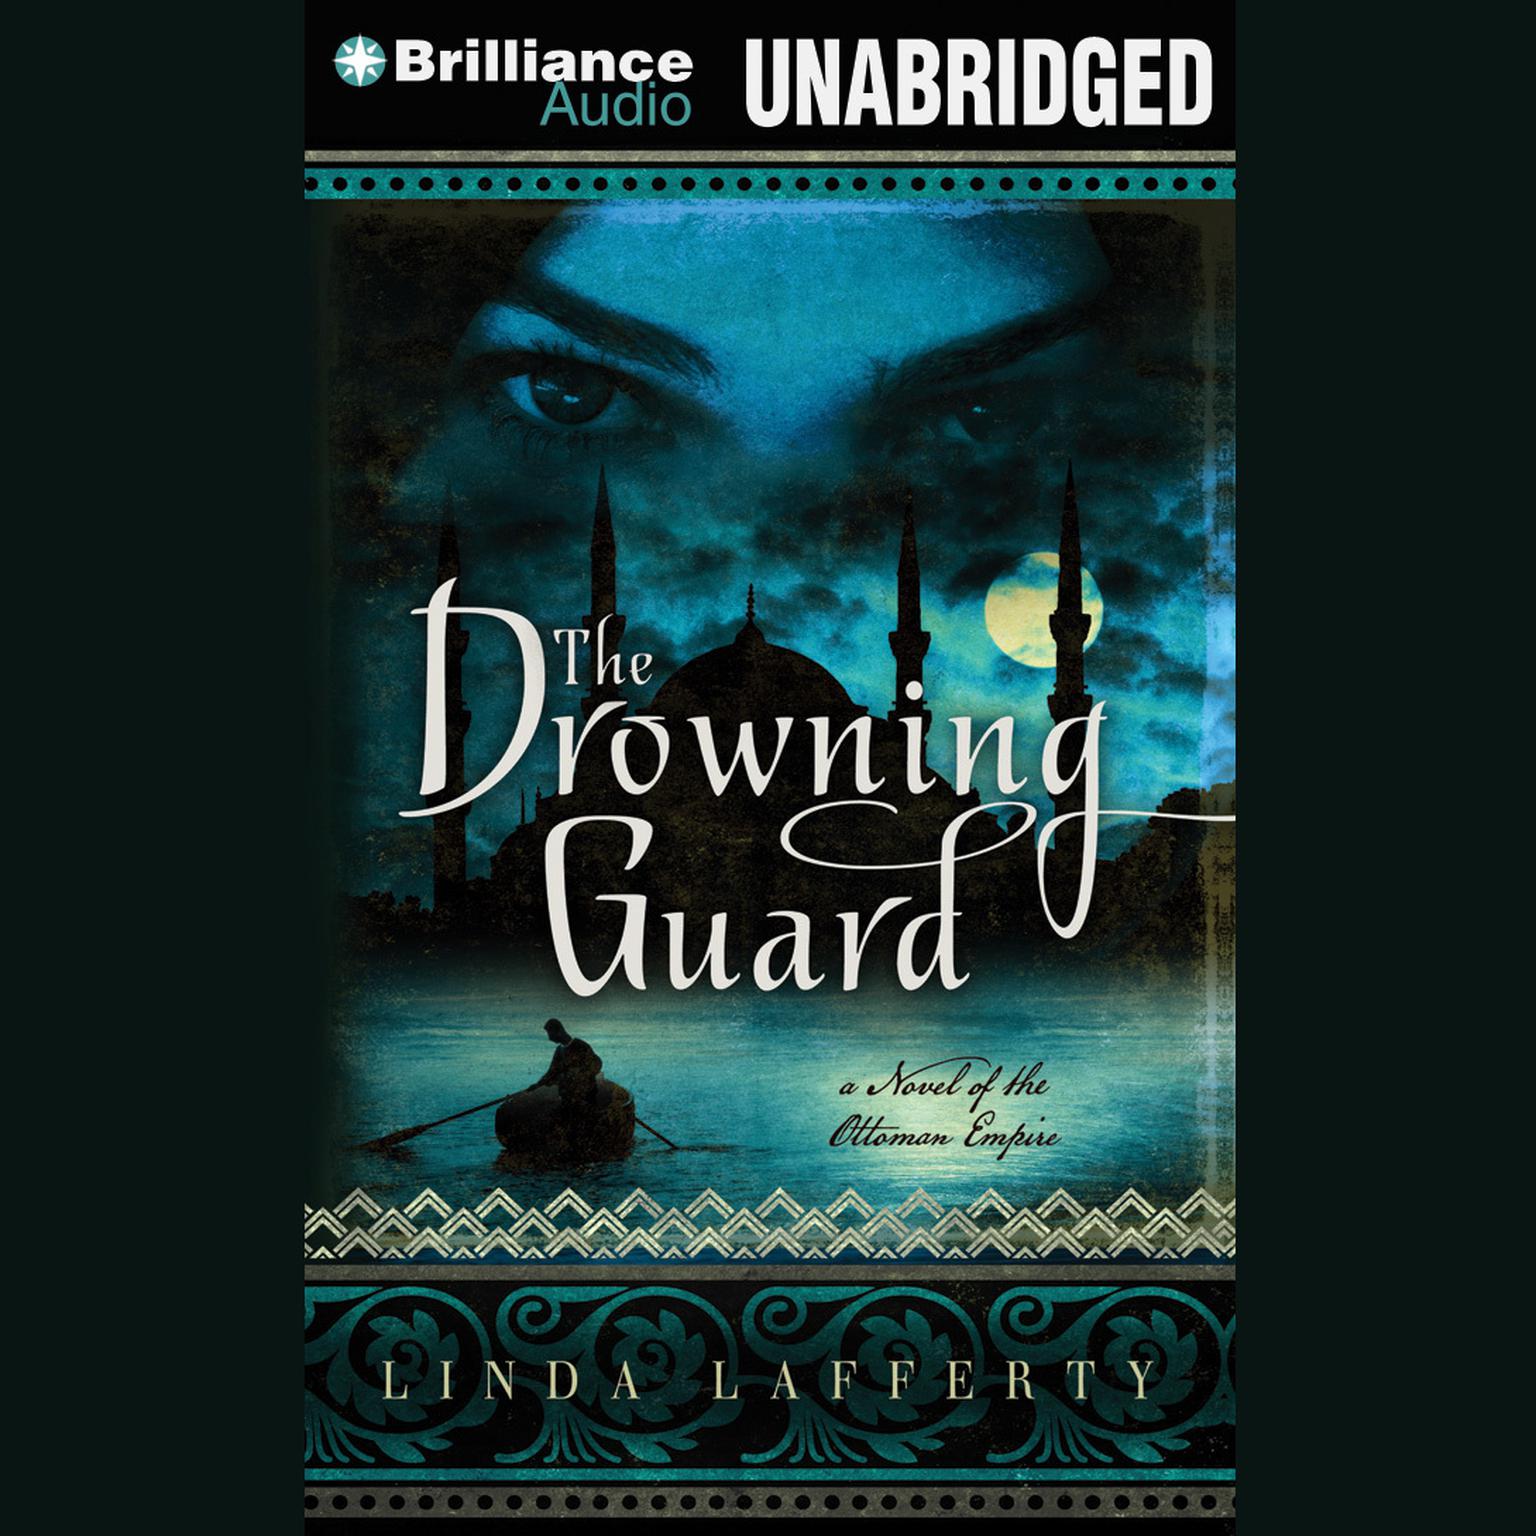 The Drowning Guard: A Novel of the Ottoman Empire Audiobook, by Linda Lafferty